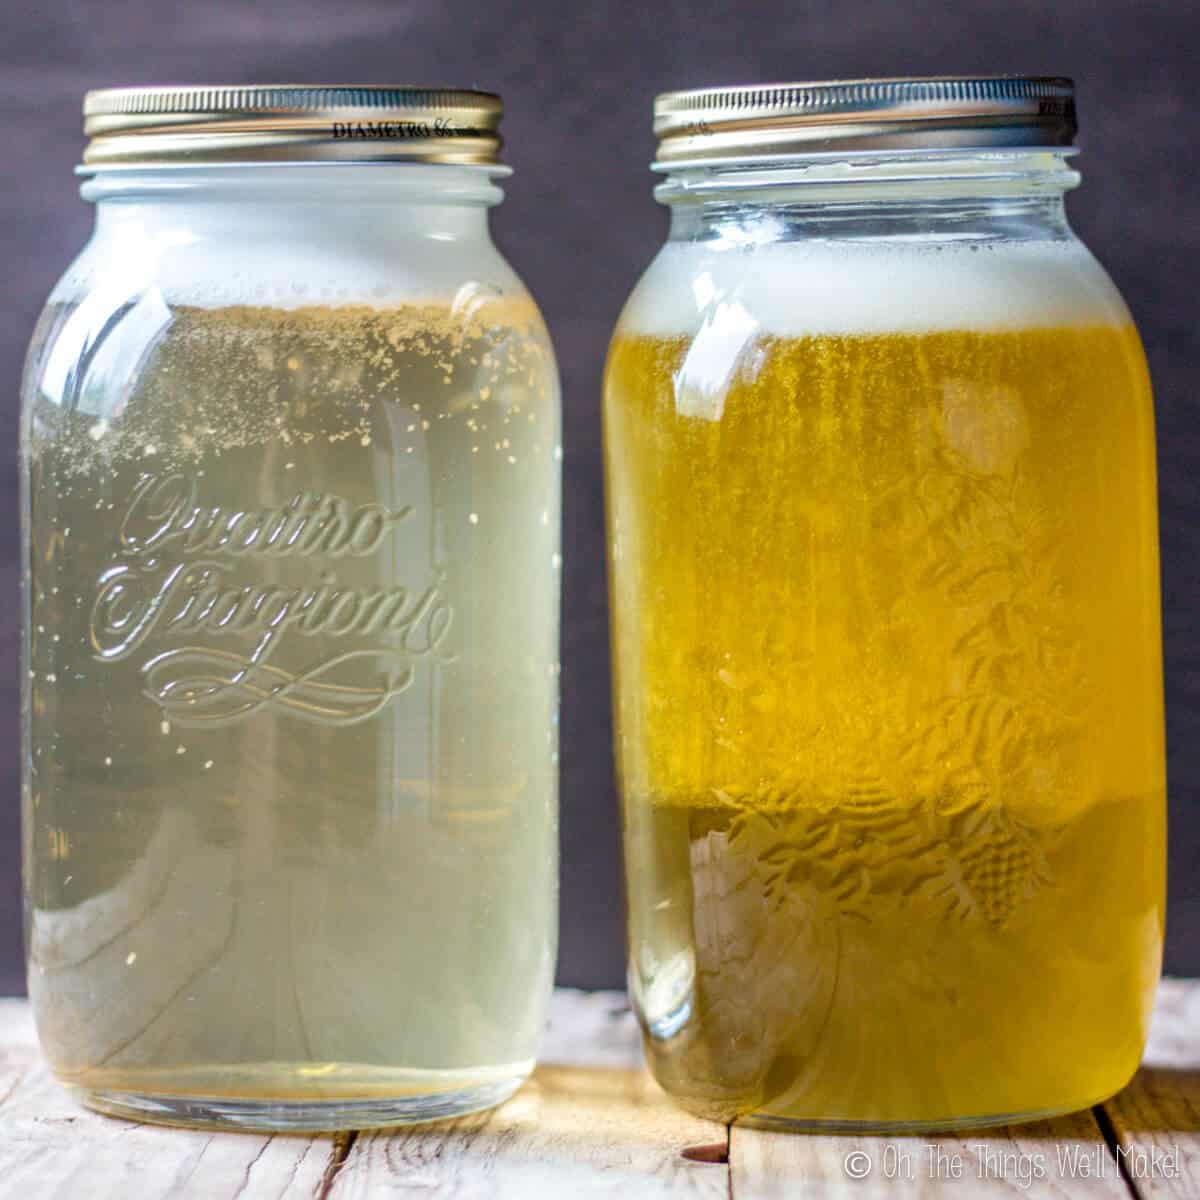 Two jars of homemade liquid soap: one coconut oil based and one olive oil based. The olive oil based soap is becoming more opaque.